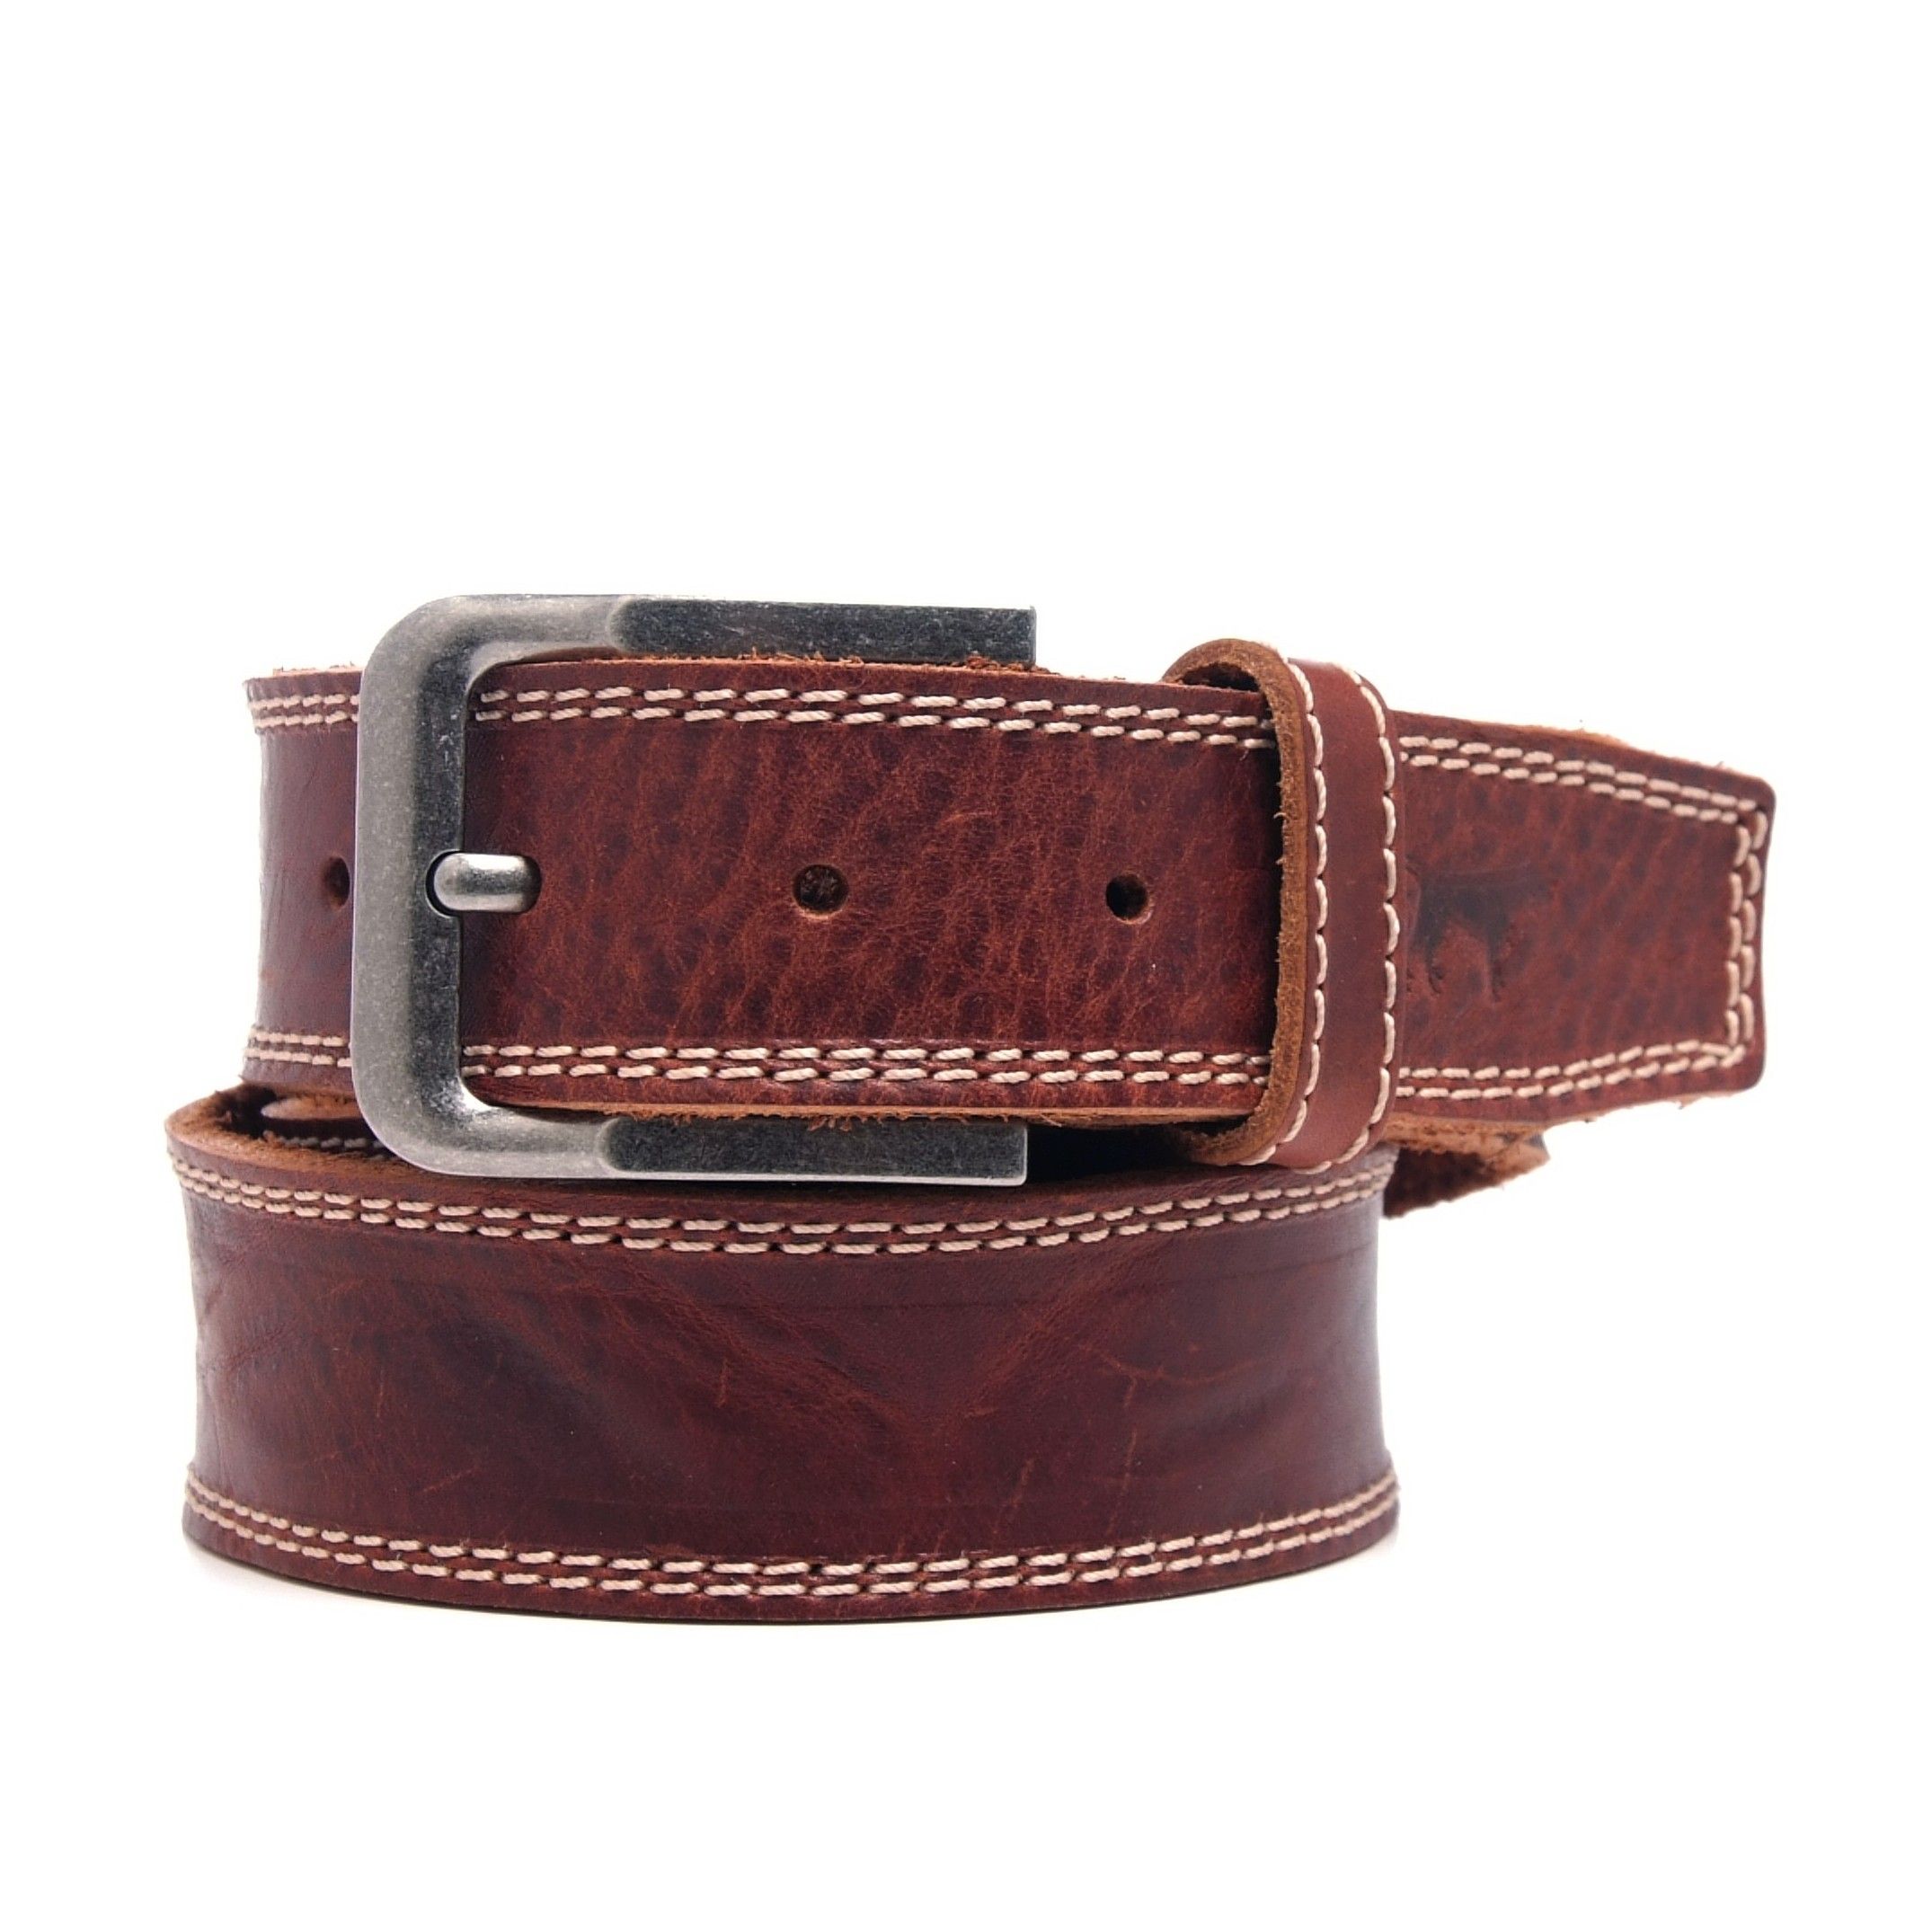 Castellanisimos men's leather belt with double stitching in beige. Metal buckle. Width: 3,5cm. MADE IN SPAIN.